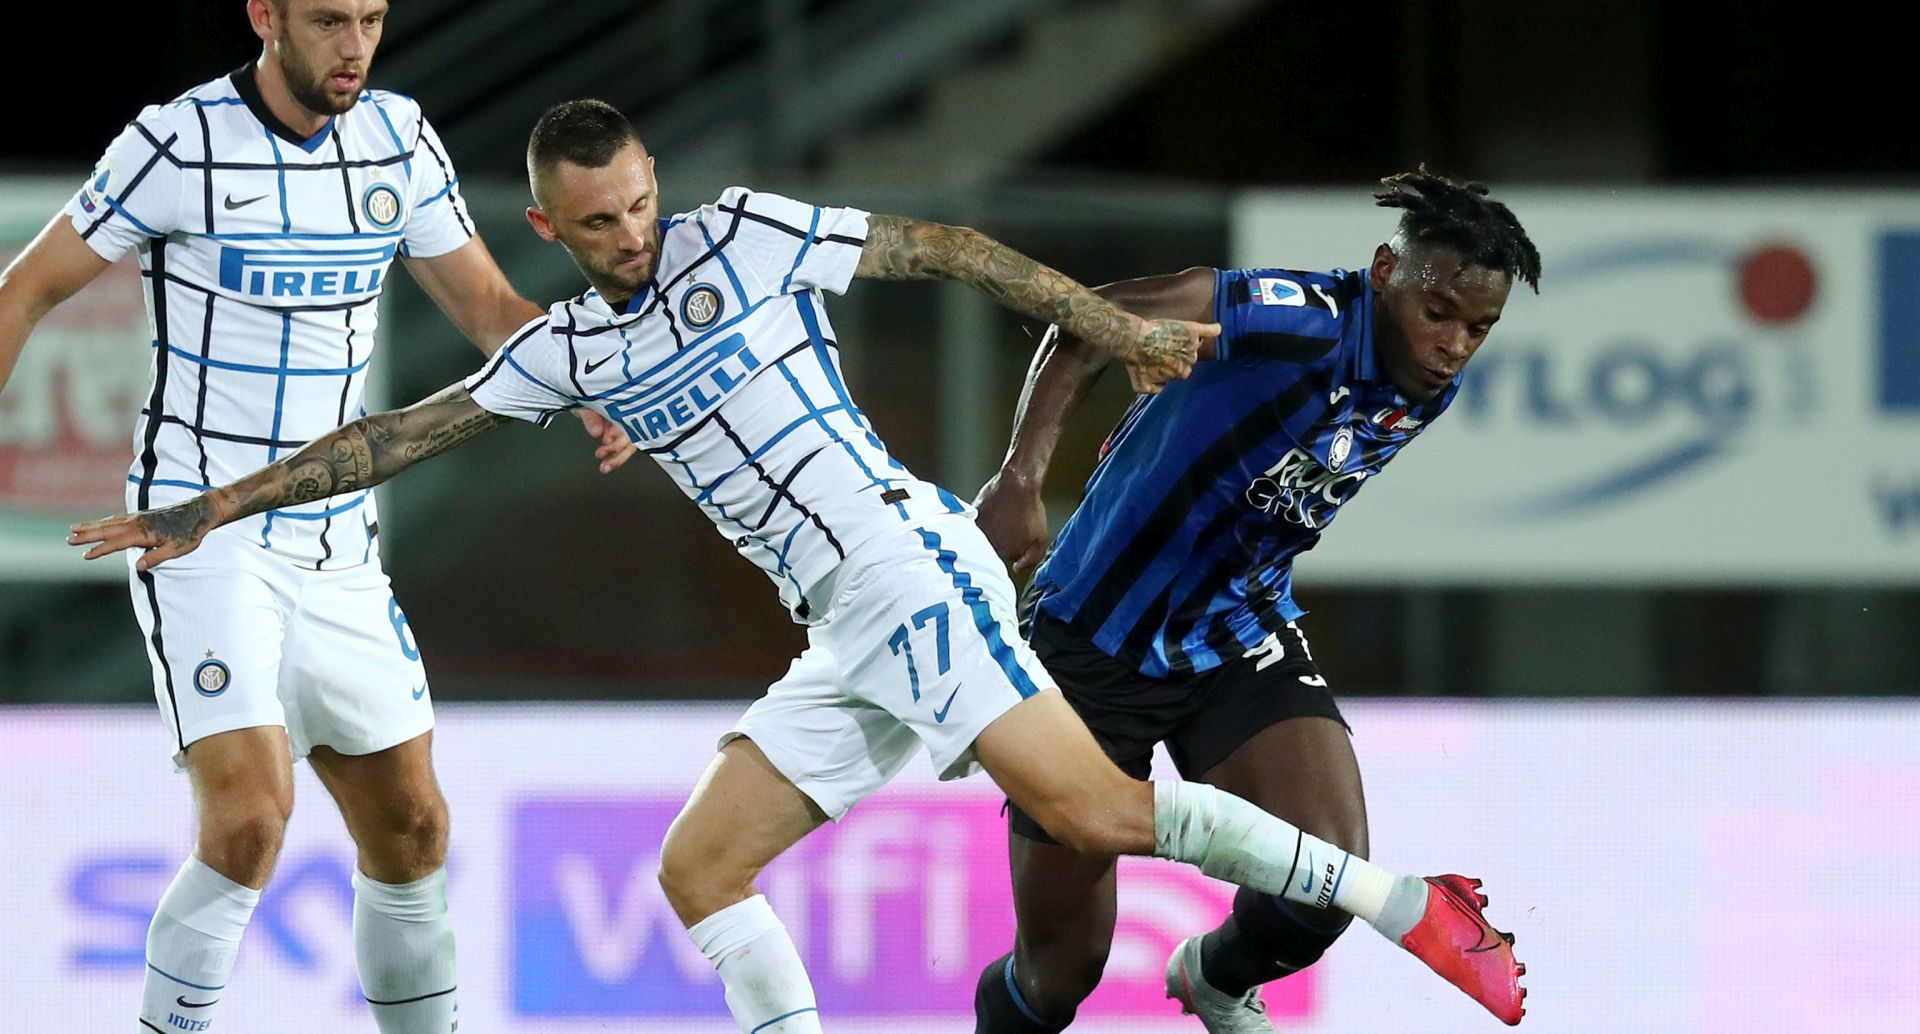 epa08579737 Atalanta's Duvan Zapata (R) and Inter's Marcelo Brozovic in action during the Italian Serie A soccer match Atalanta BC vs FC Inter at the Gewiss Stadium in Bergamo, Italy, 01 August 2020.  EPA/PAOLO MAGNI